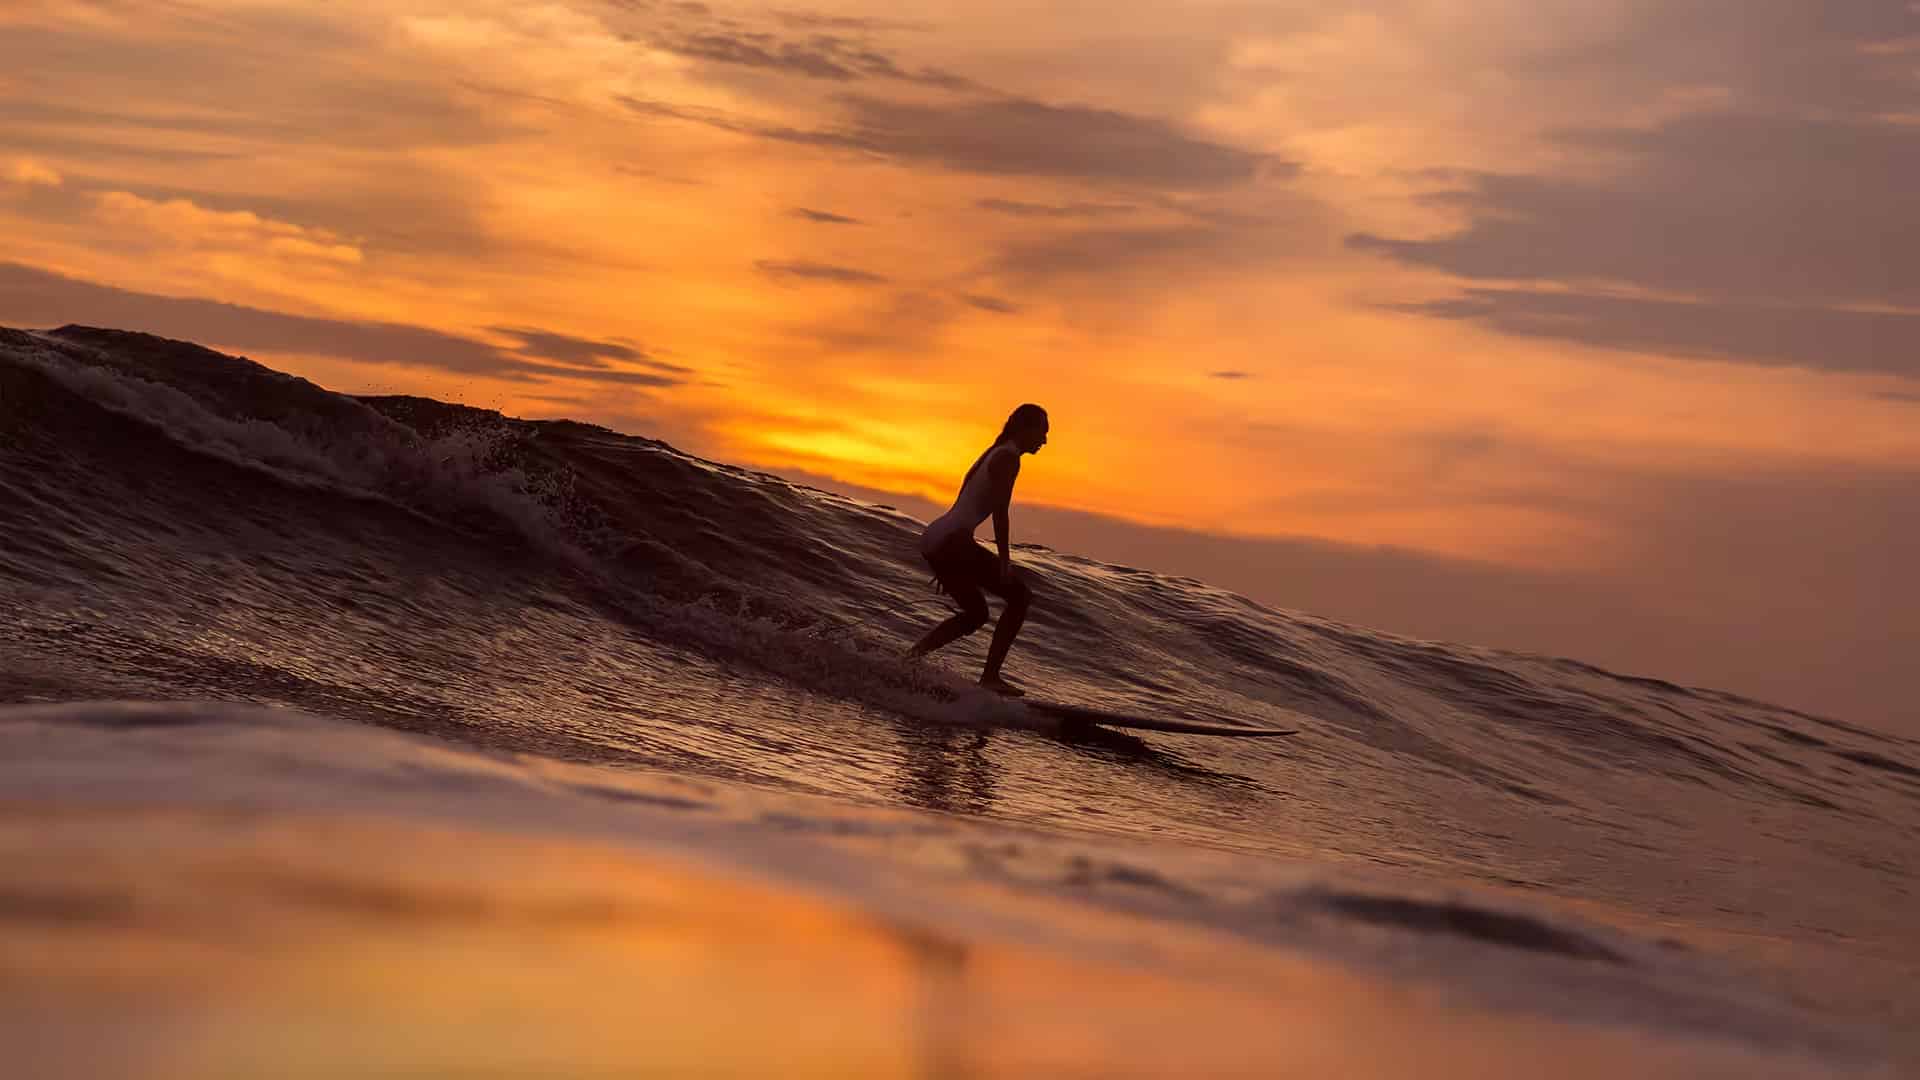 Is it OK to surf at night?